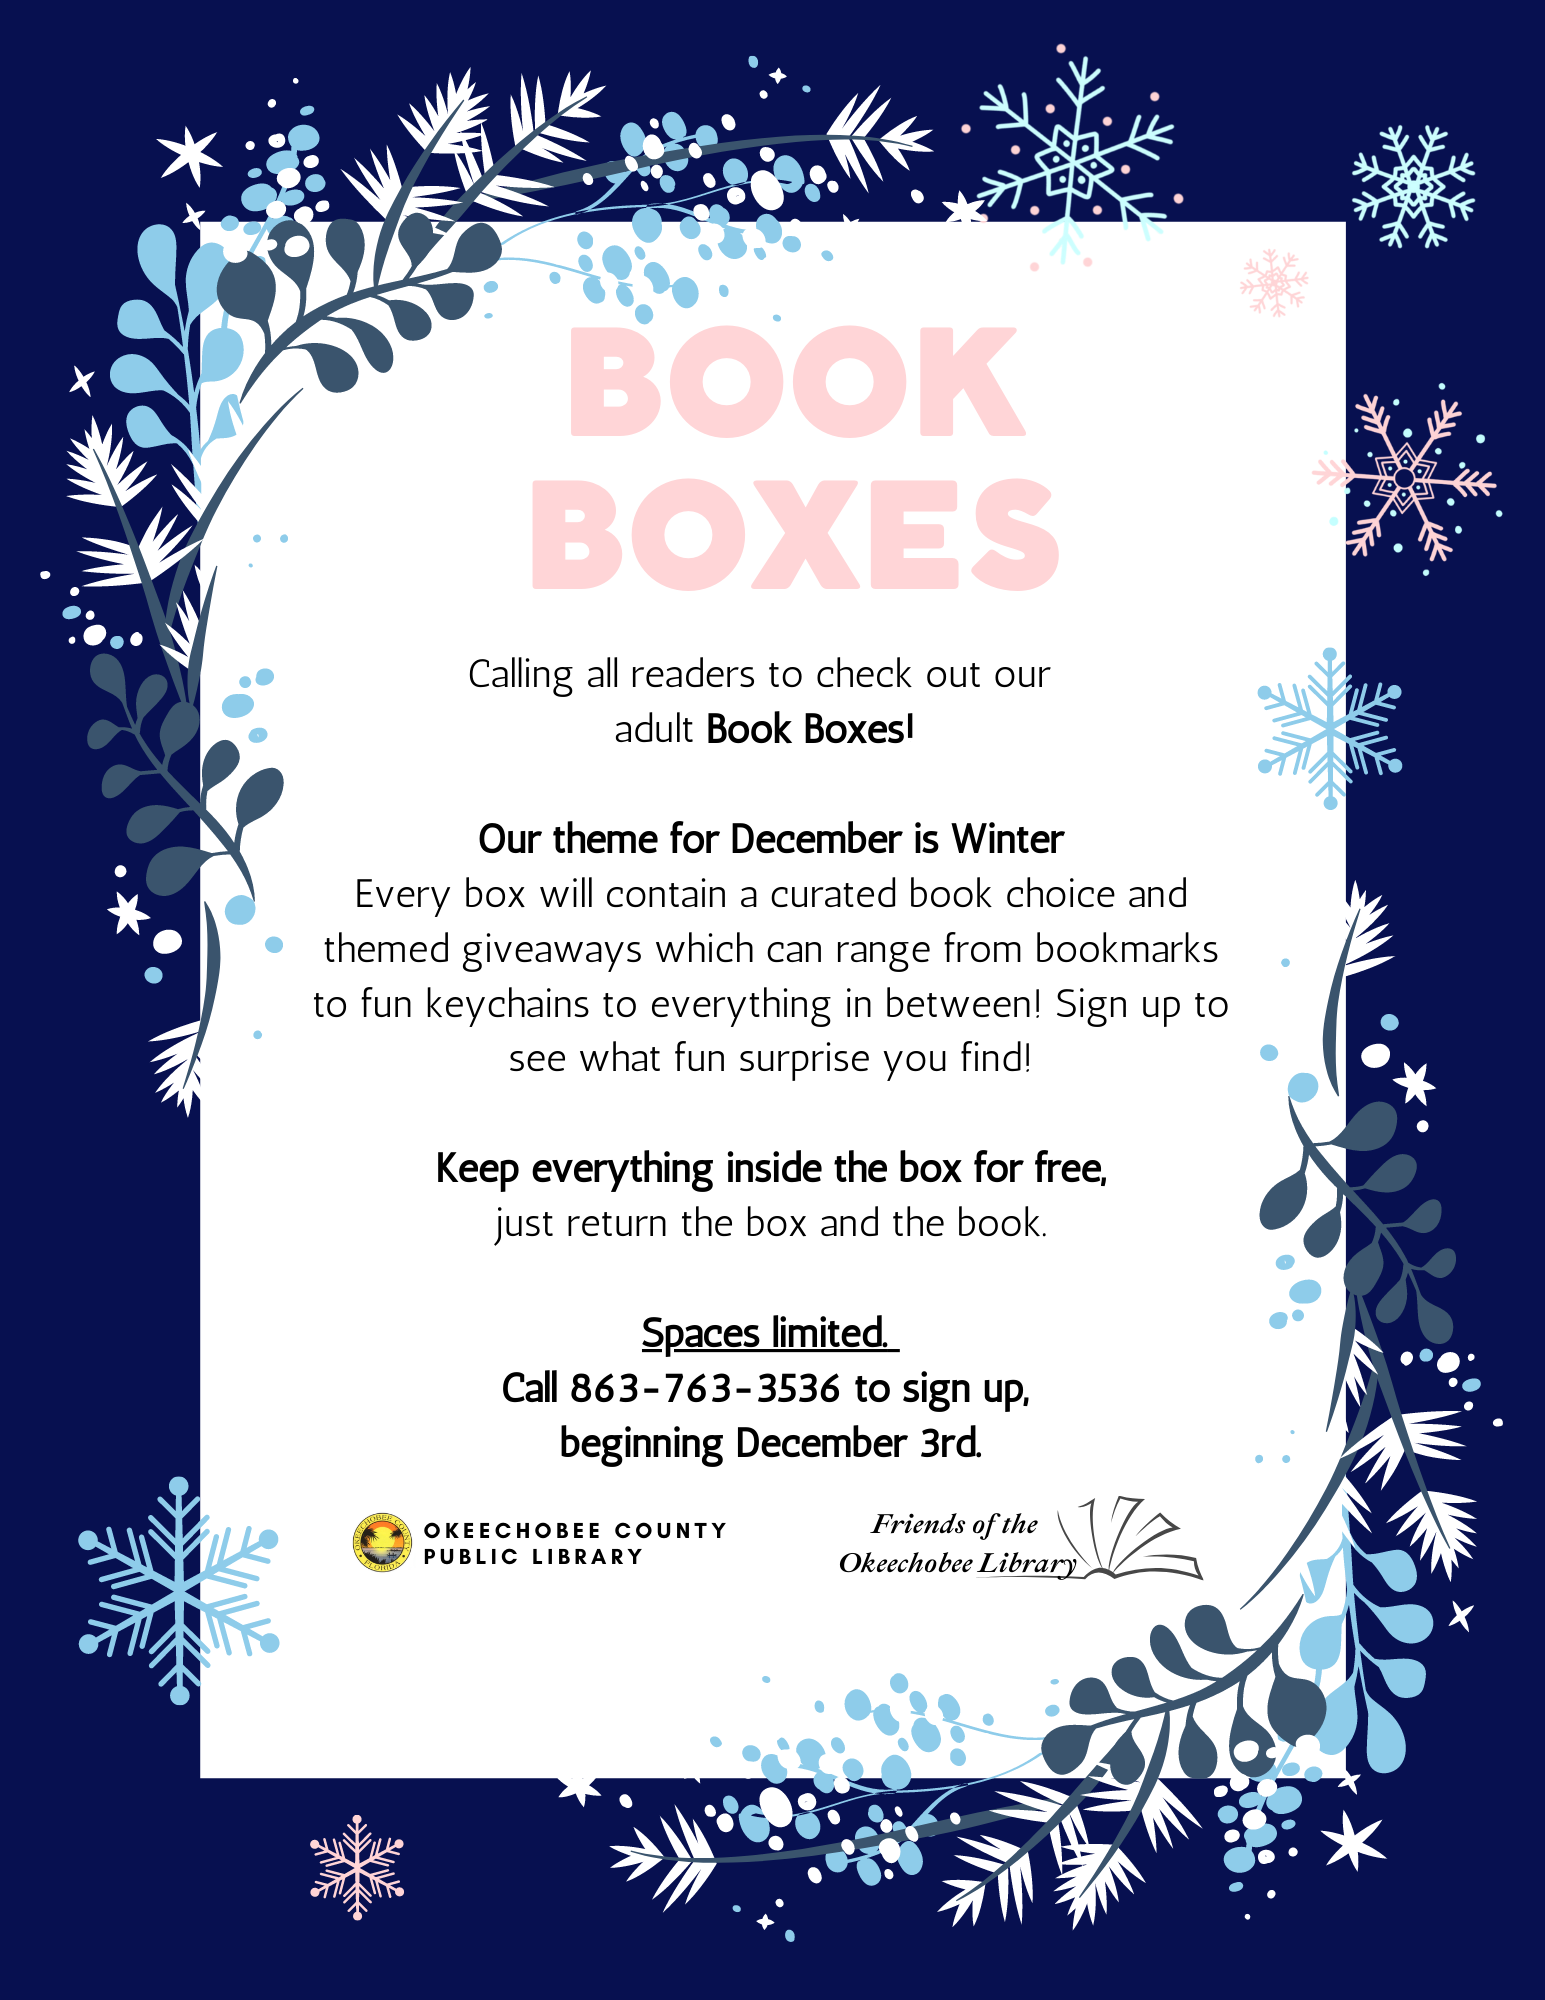 "December Book Boxes! Every box will contain a curated book choice and themed giveaways which can range from bookmarks to fun keychains to everything in between! Sign up to see what fun surprise you find!"